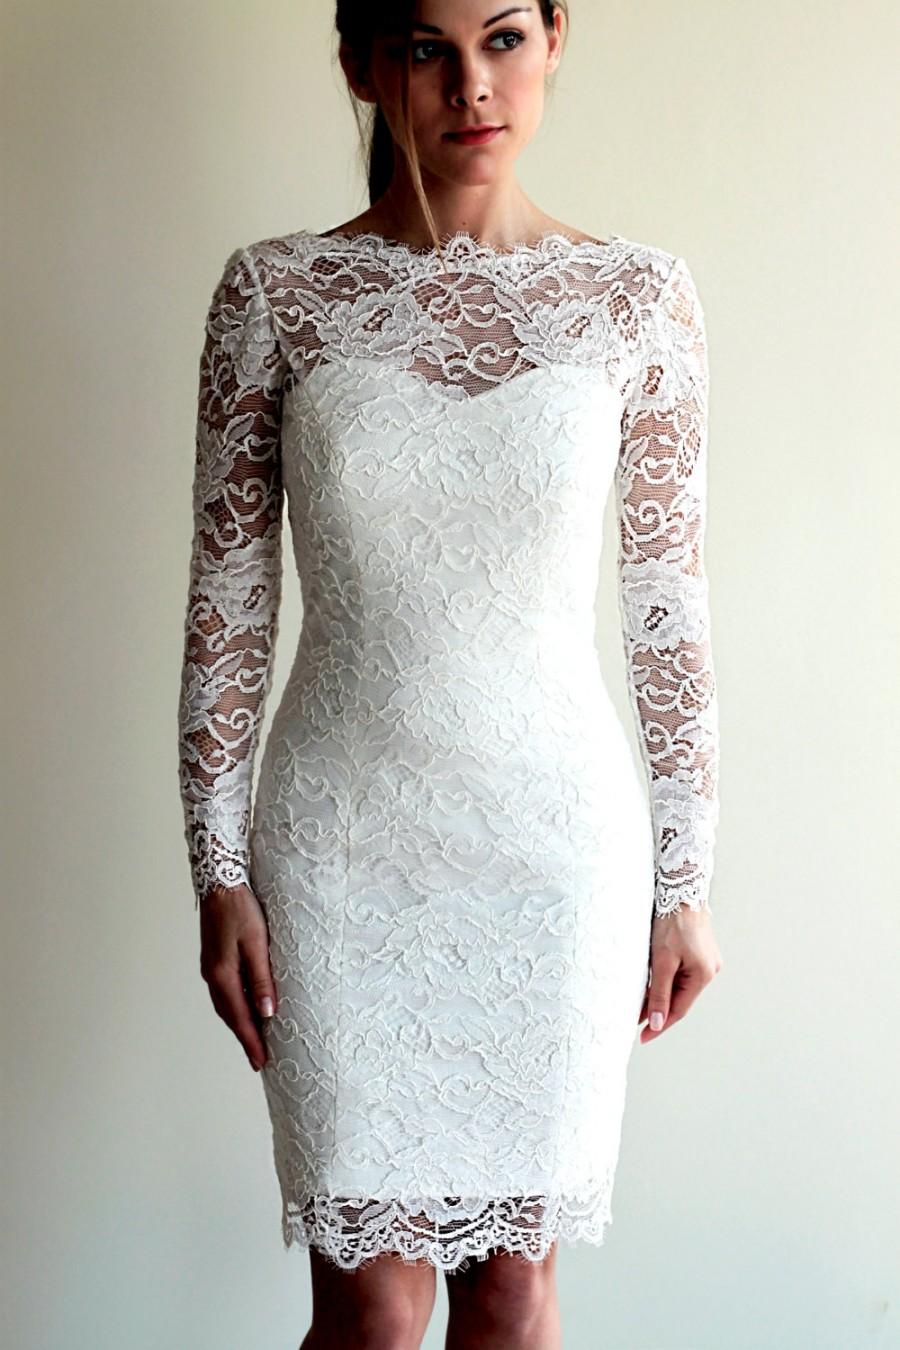 Hochzeit - Short Wedding Dress with Sleeves and Illusion Neckline and Illusion Back, Reception Lace Dress, See-through Lace Dress